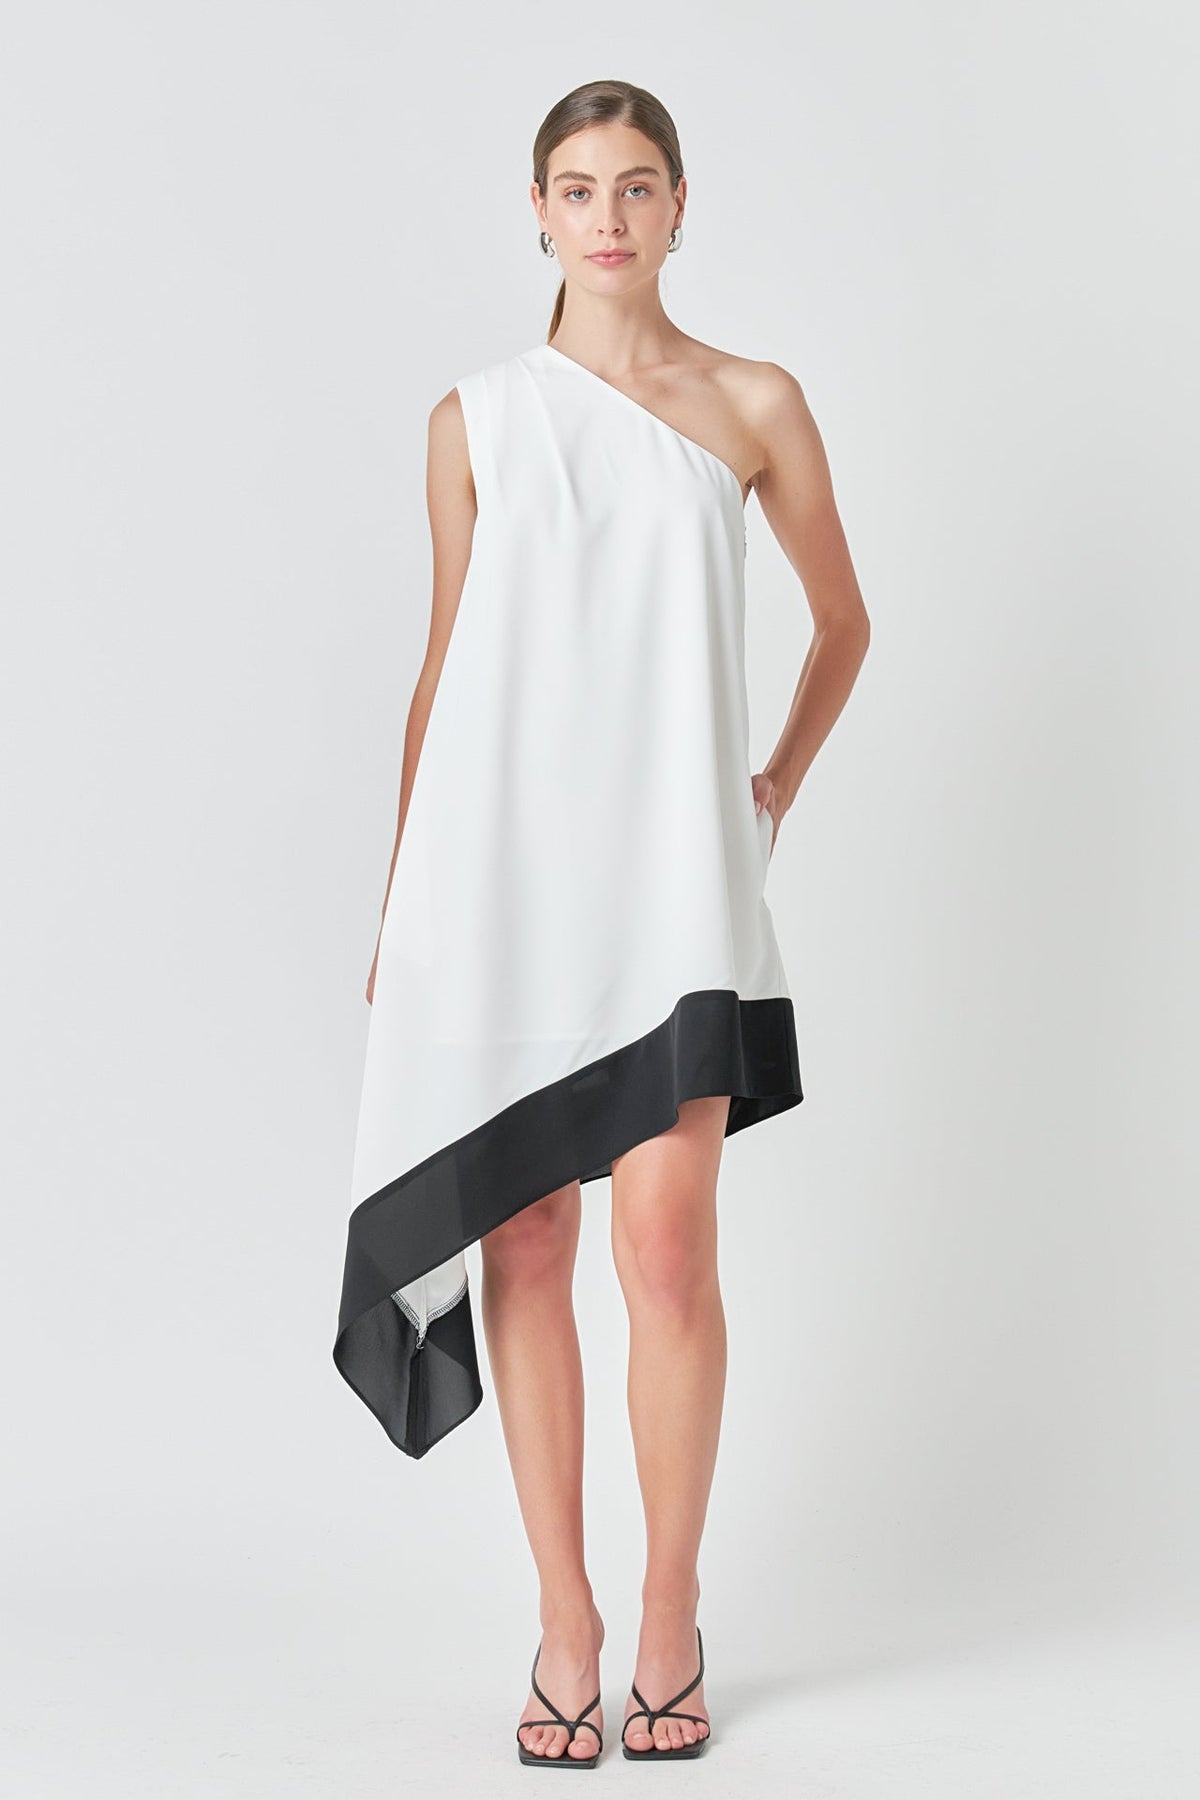 ENDLESS ROSE - One Shoulder Colorblock Dress - DRESSES available at Objectrare